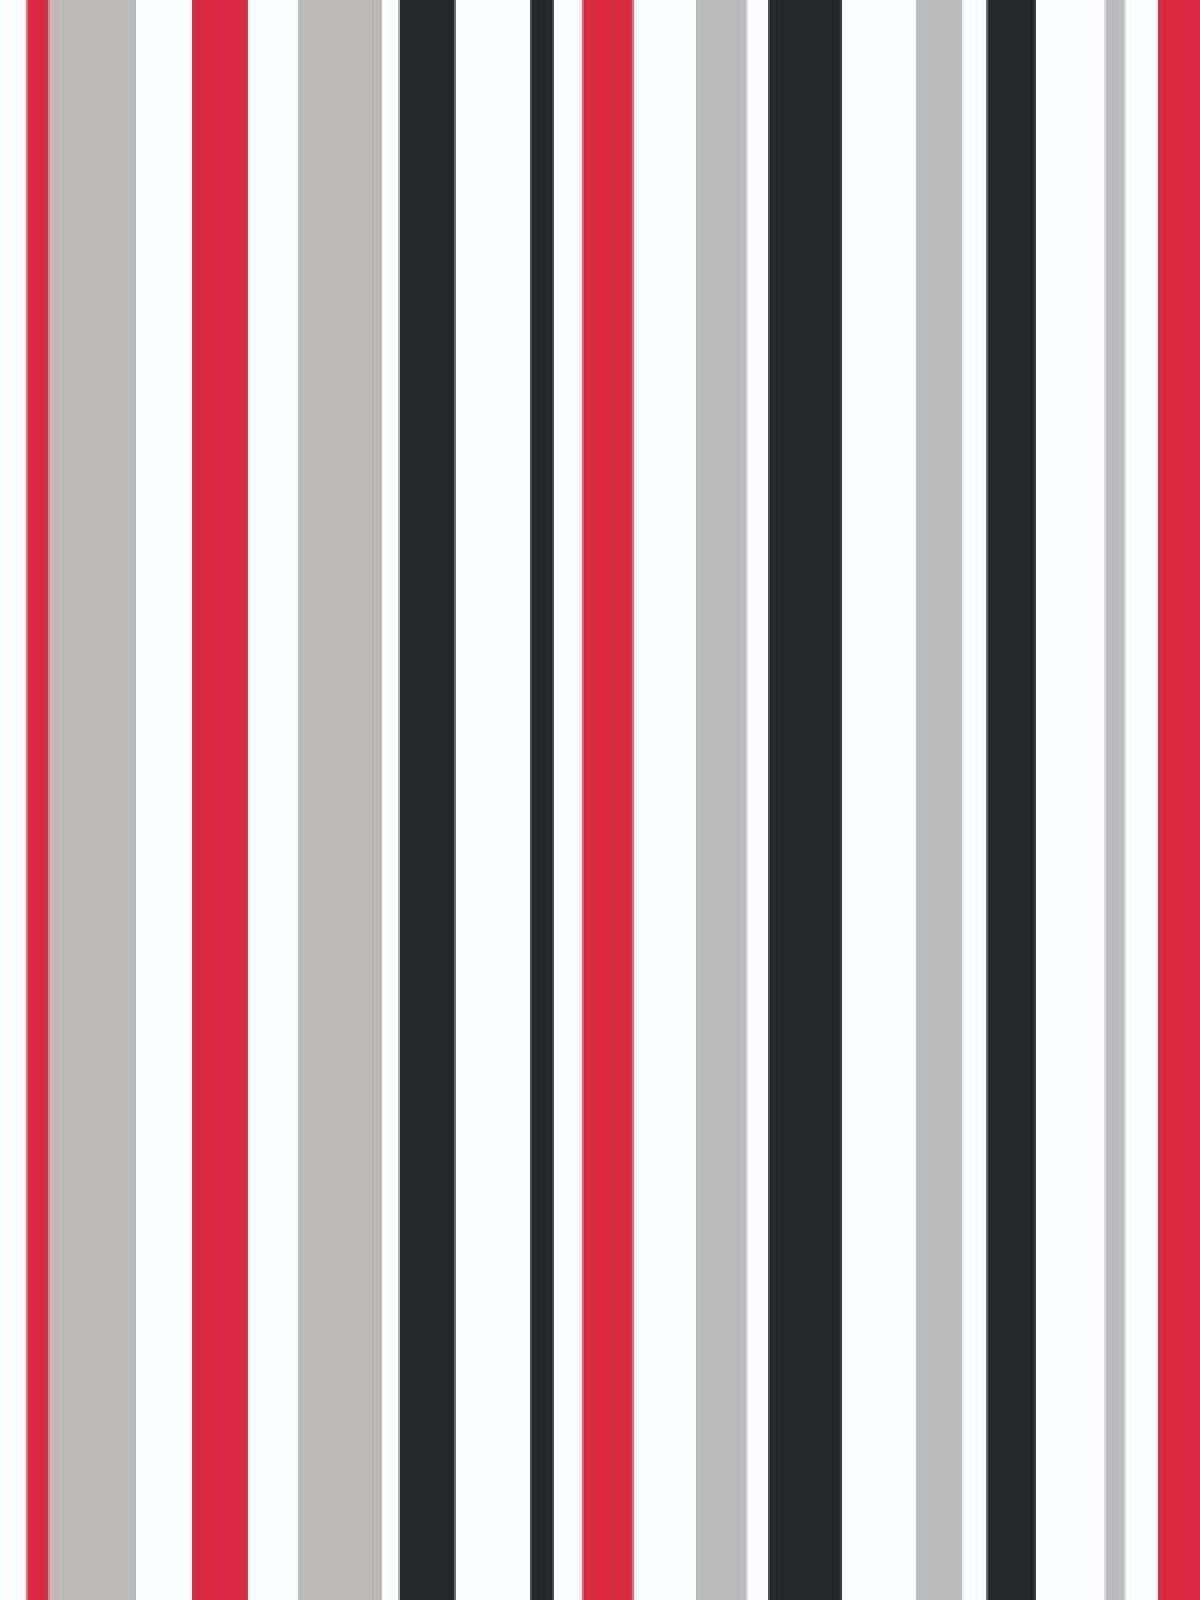 Bold, classic black and white striped background